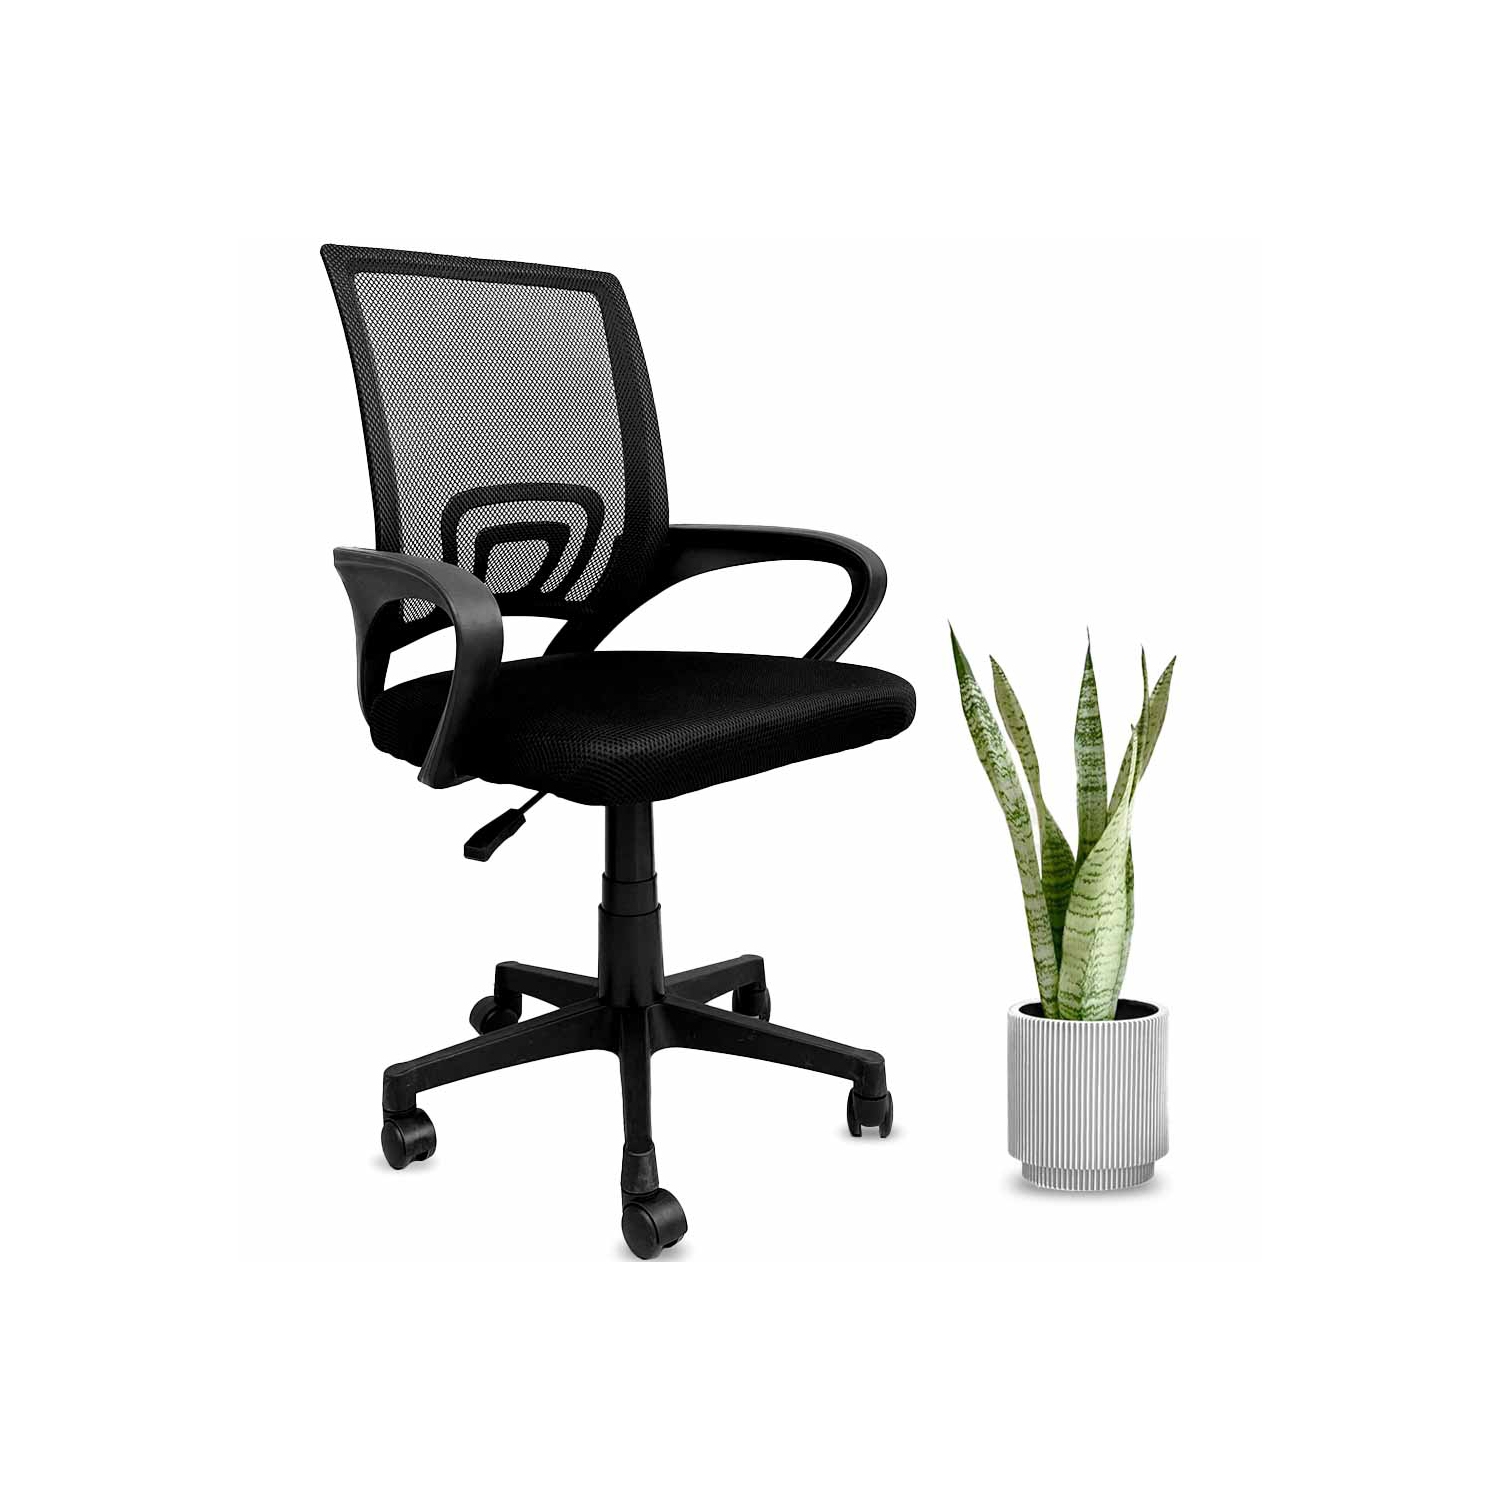 MotionGrey Mesh Series - Executive Ergonomic Computer Desk Home Office Chair with Mesh Back - Black